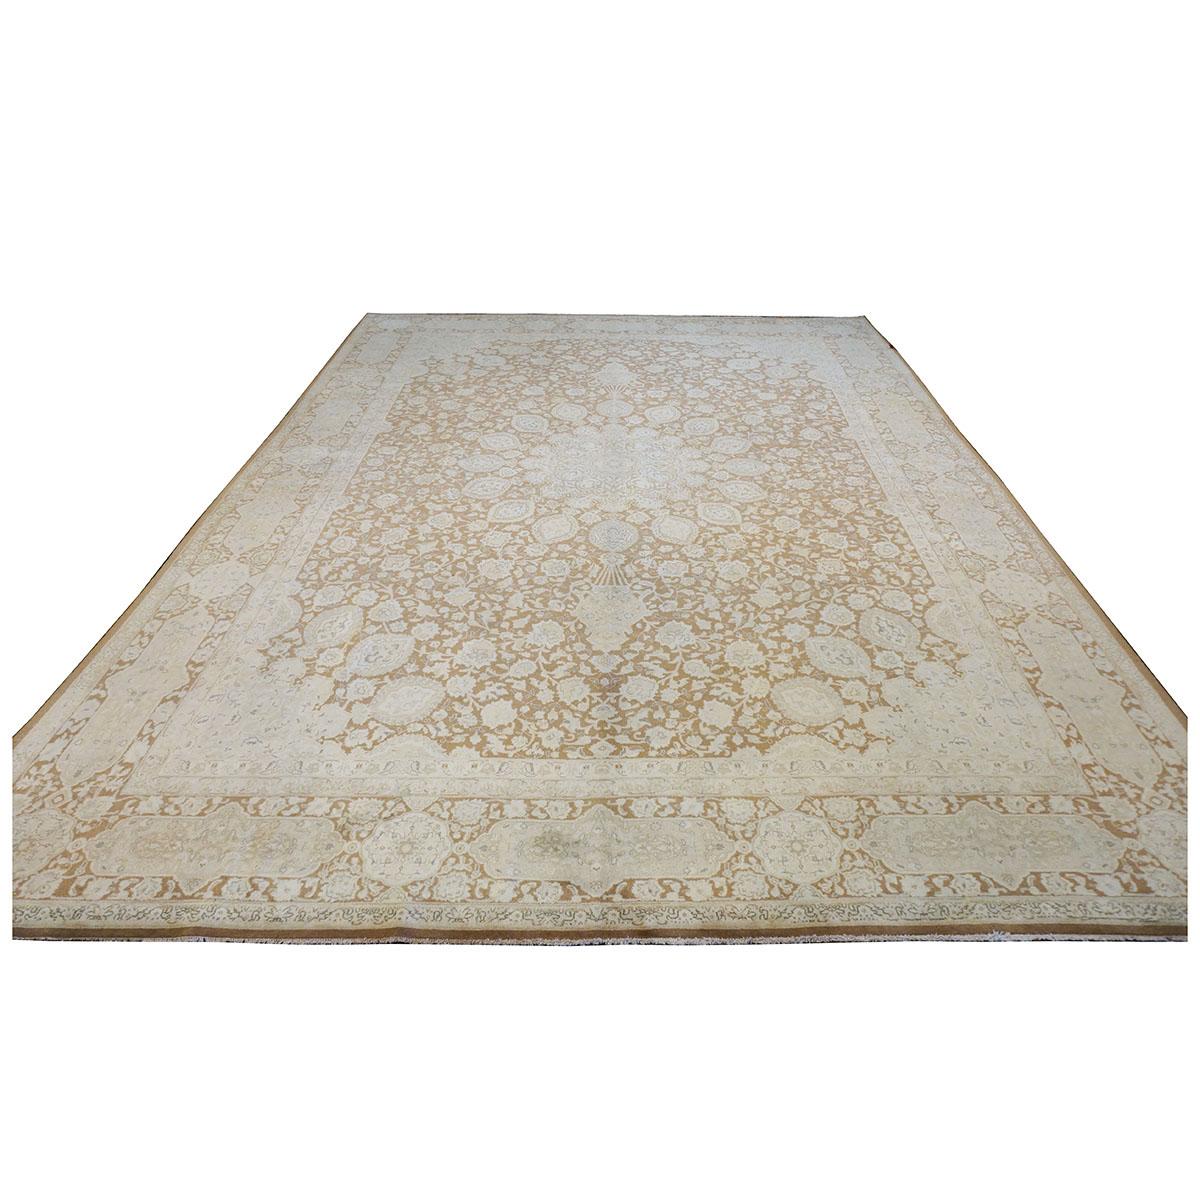 Ashly Fine Rugs presents a 1940s Antique Persian Tabriz 10x13 Wool Handmade Rug. Tabriz is a northern city in modern-day Iran and has forever been famous for the fineness and craftsmanship of its handmade rugs. These rugs are better known as the